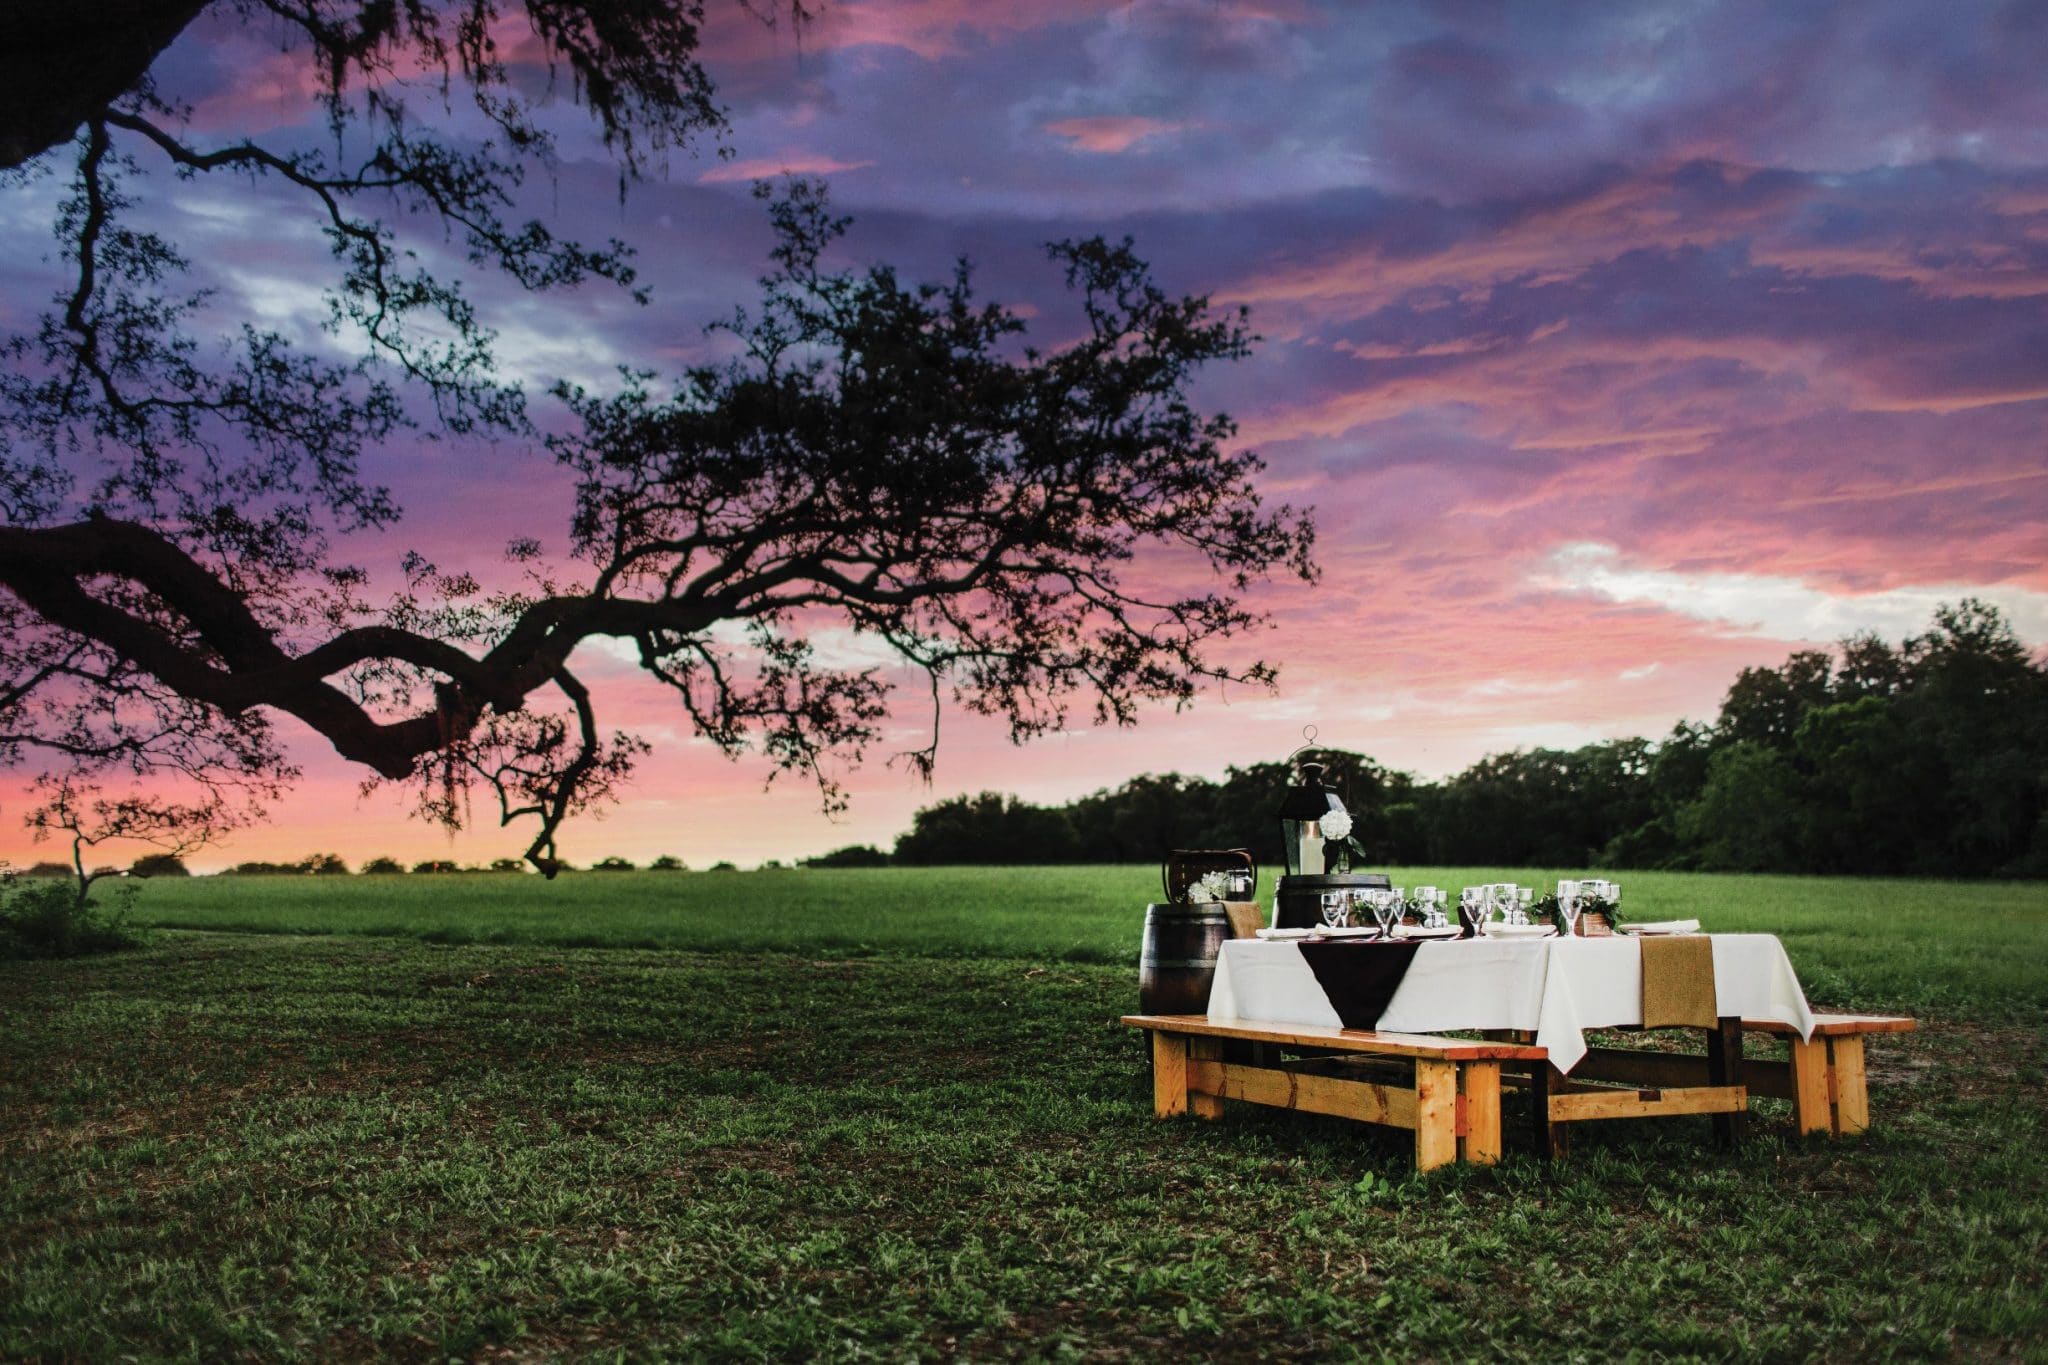 The Villages Polo Club - cute picnic table in field at sunset